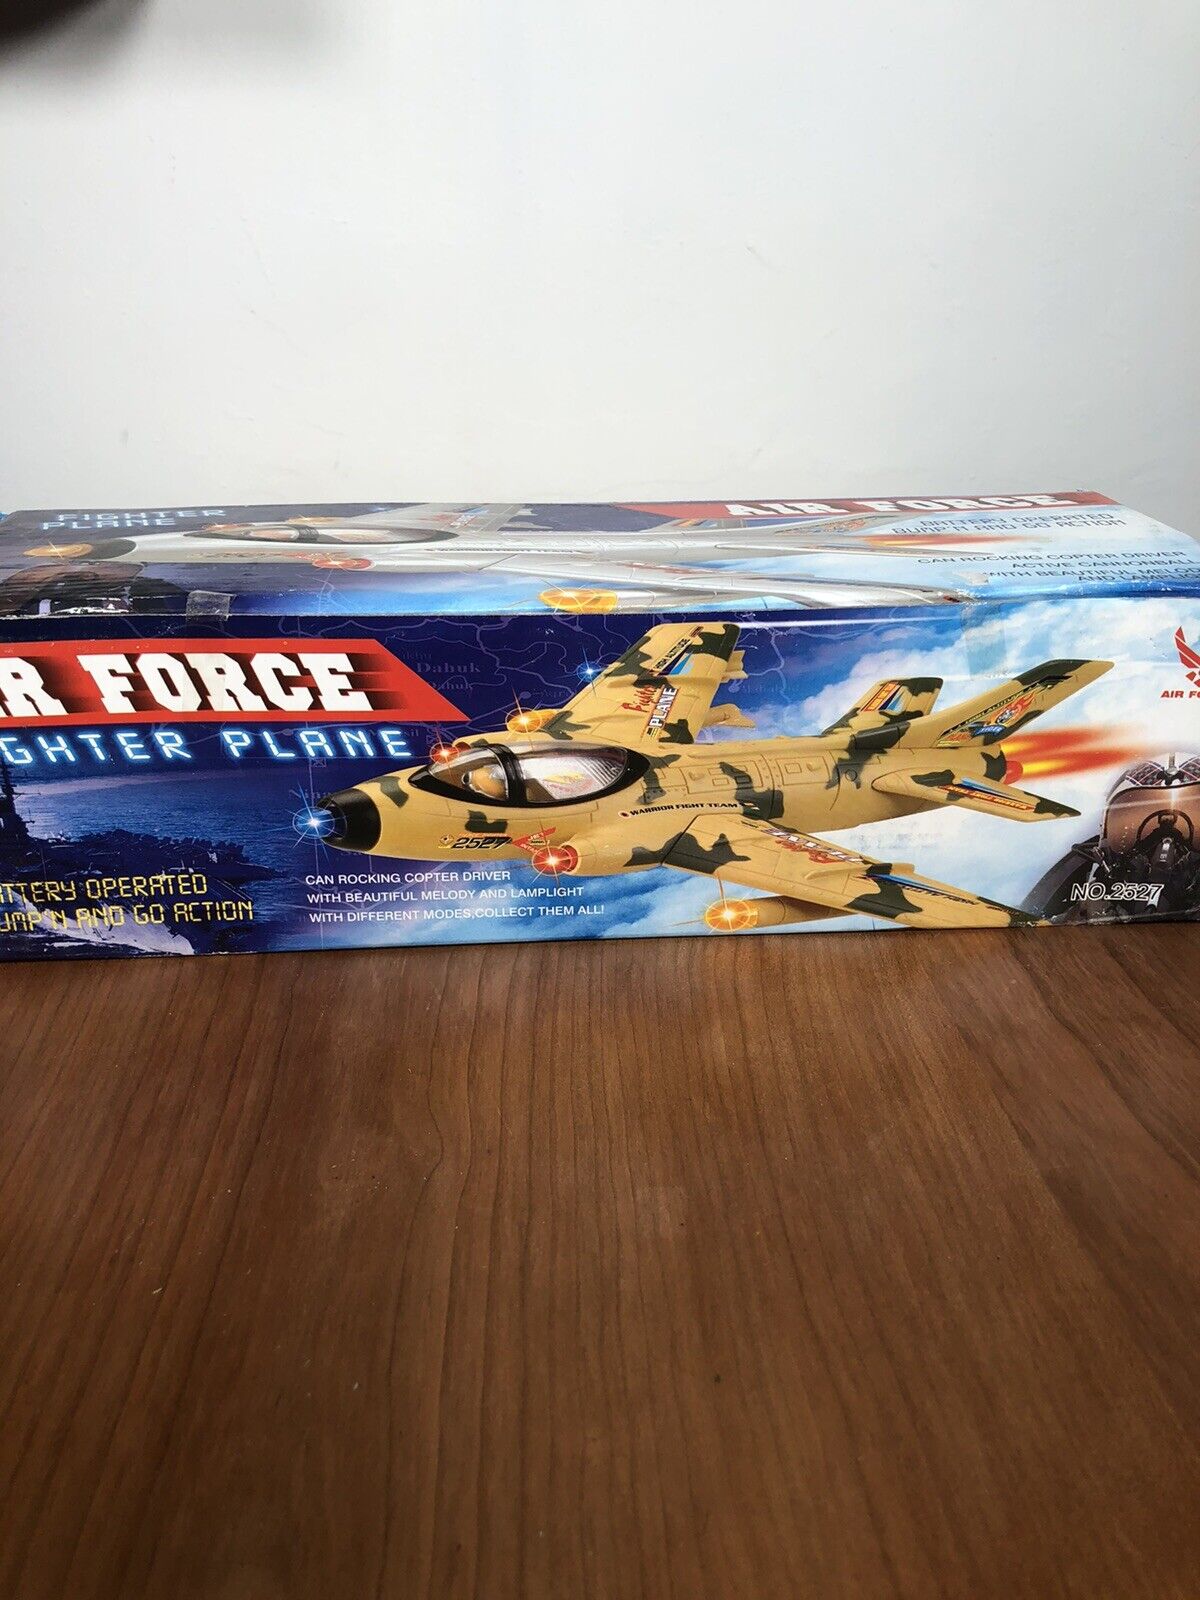 Air Force Fighter Plane No. 2527 Toy